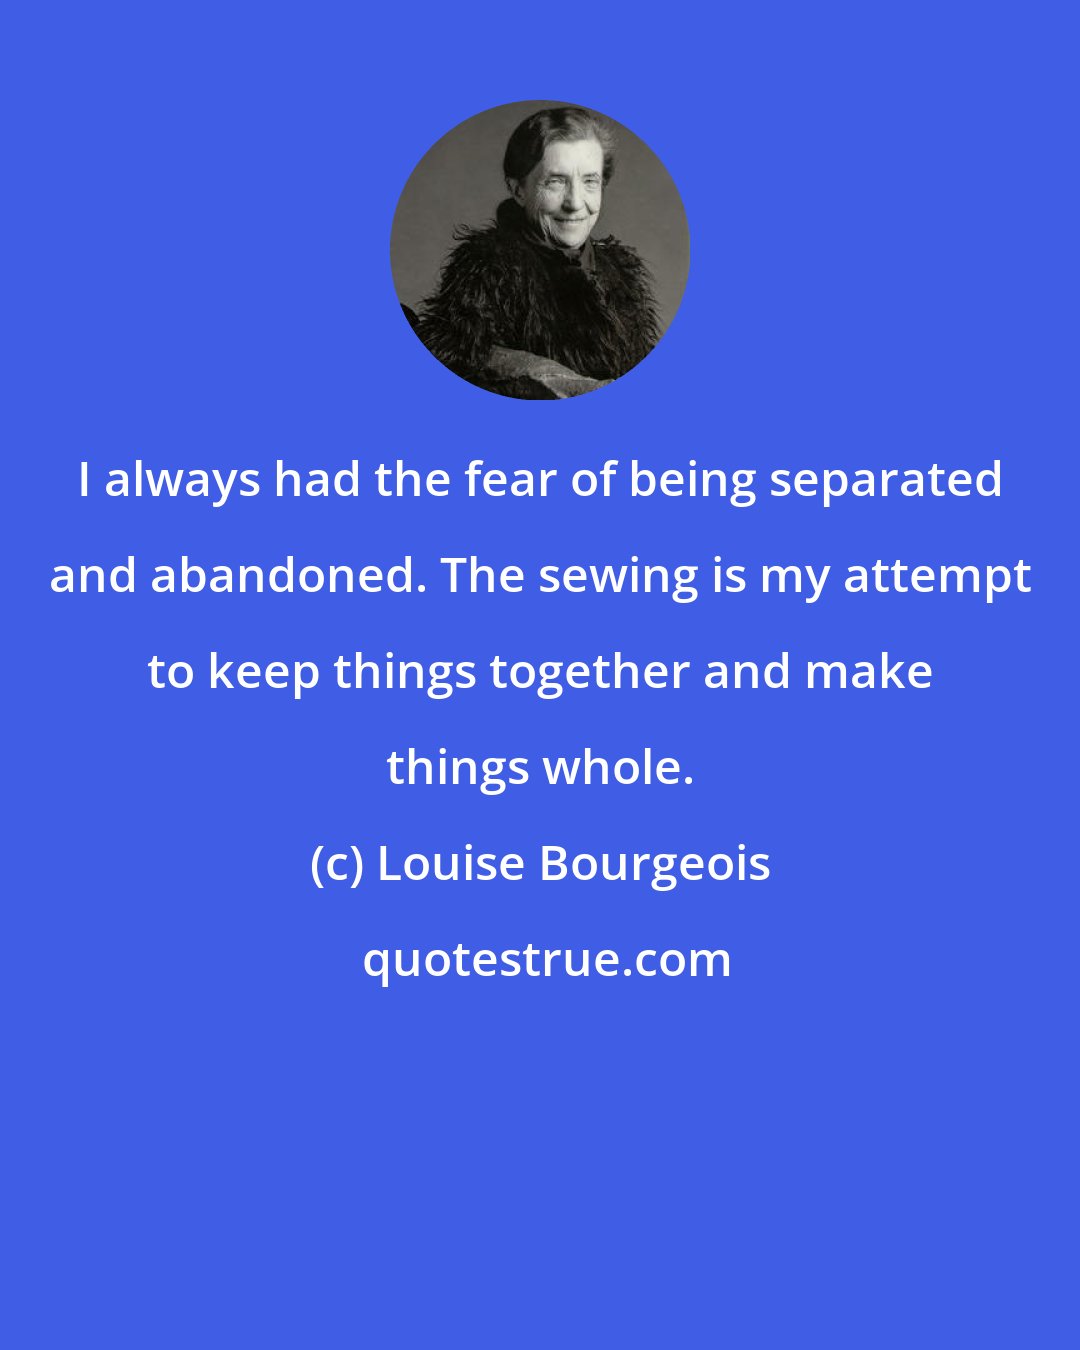 Louise Bourgeois: I always had the fear of being separated and abandoned. The sewing is my attempt to keep things together and make things whole.